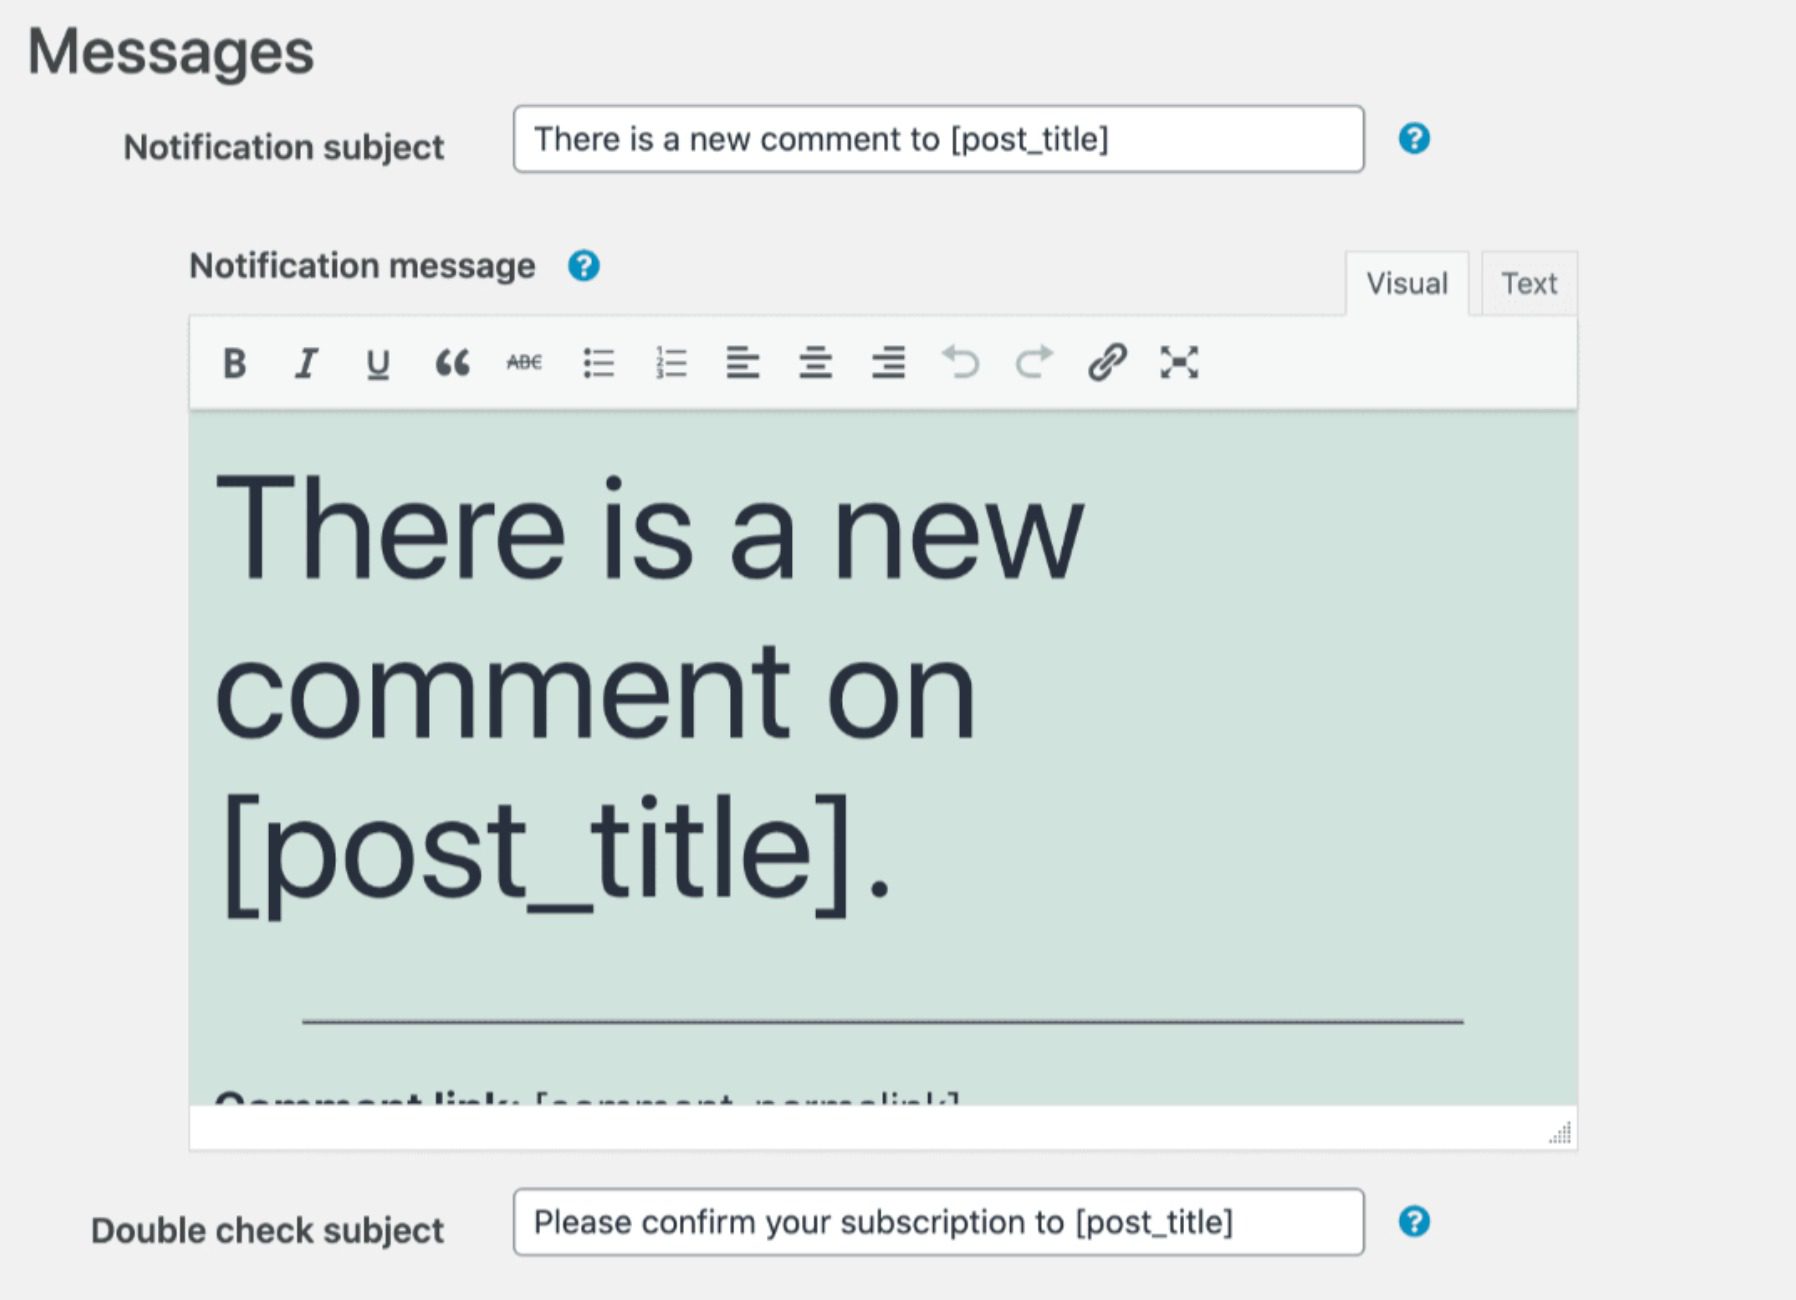 Customizing the comment subscription emails.